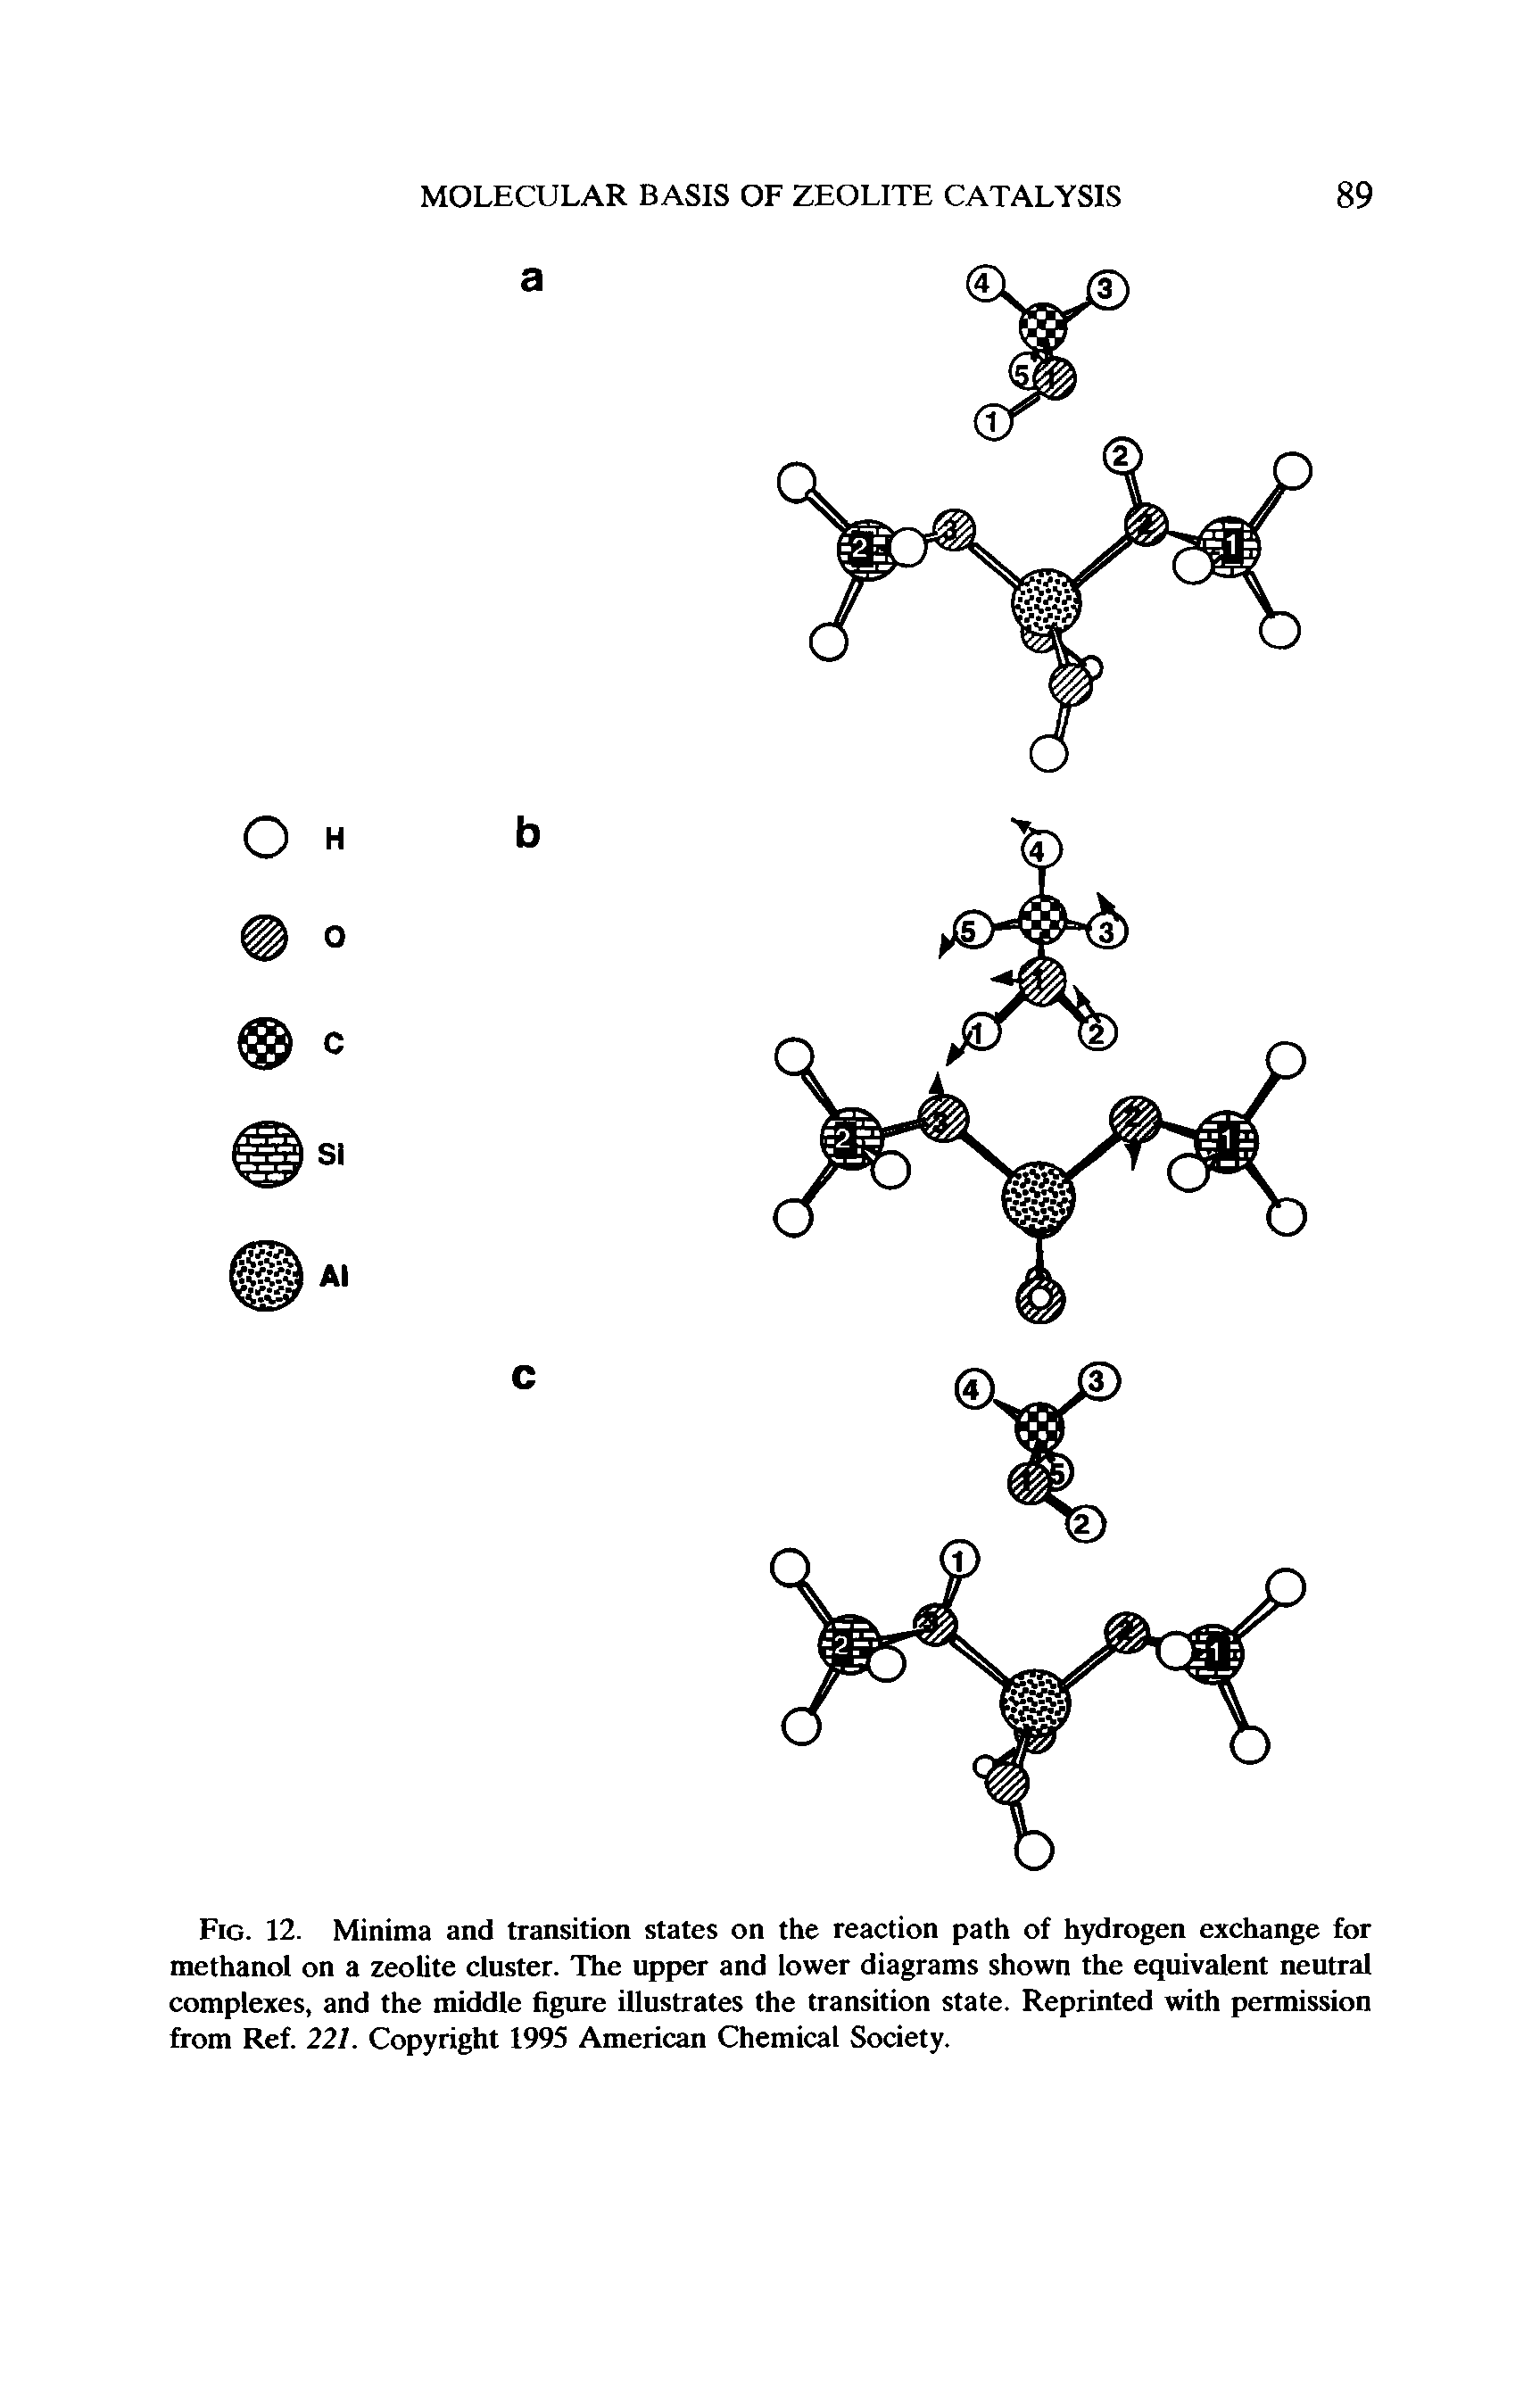 Fig. 12. Minima and transition states on the reaction path of hydrogen exchange for methanol on a zeolite cluster. The upper and lower diagrams shown the equivalent neutral complexes, and the middle figure illustrates the transition state. Reprinted with permission from Ref. 221. Copyright 1995 American Chemical Society.